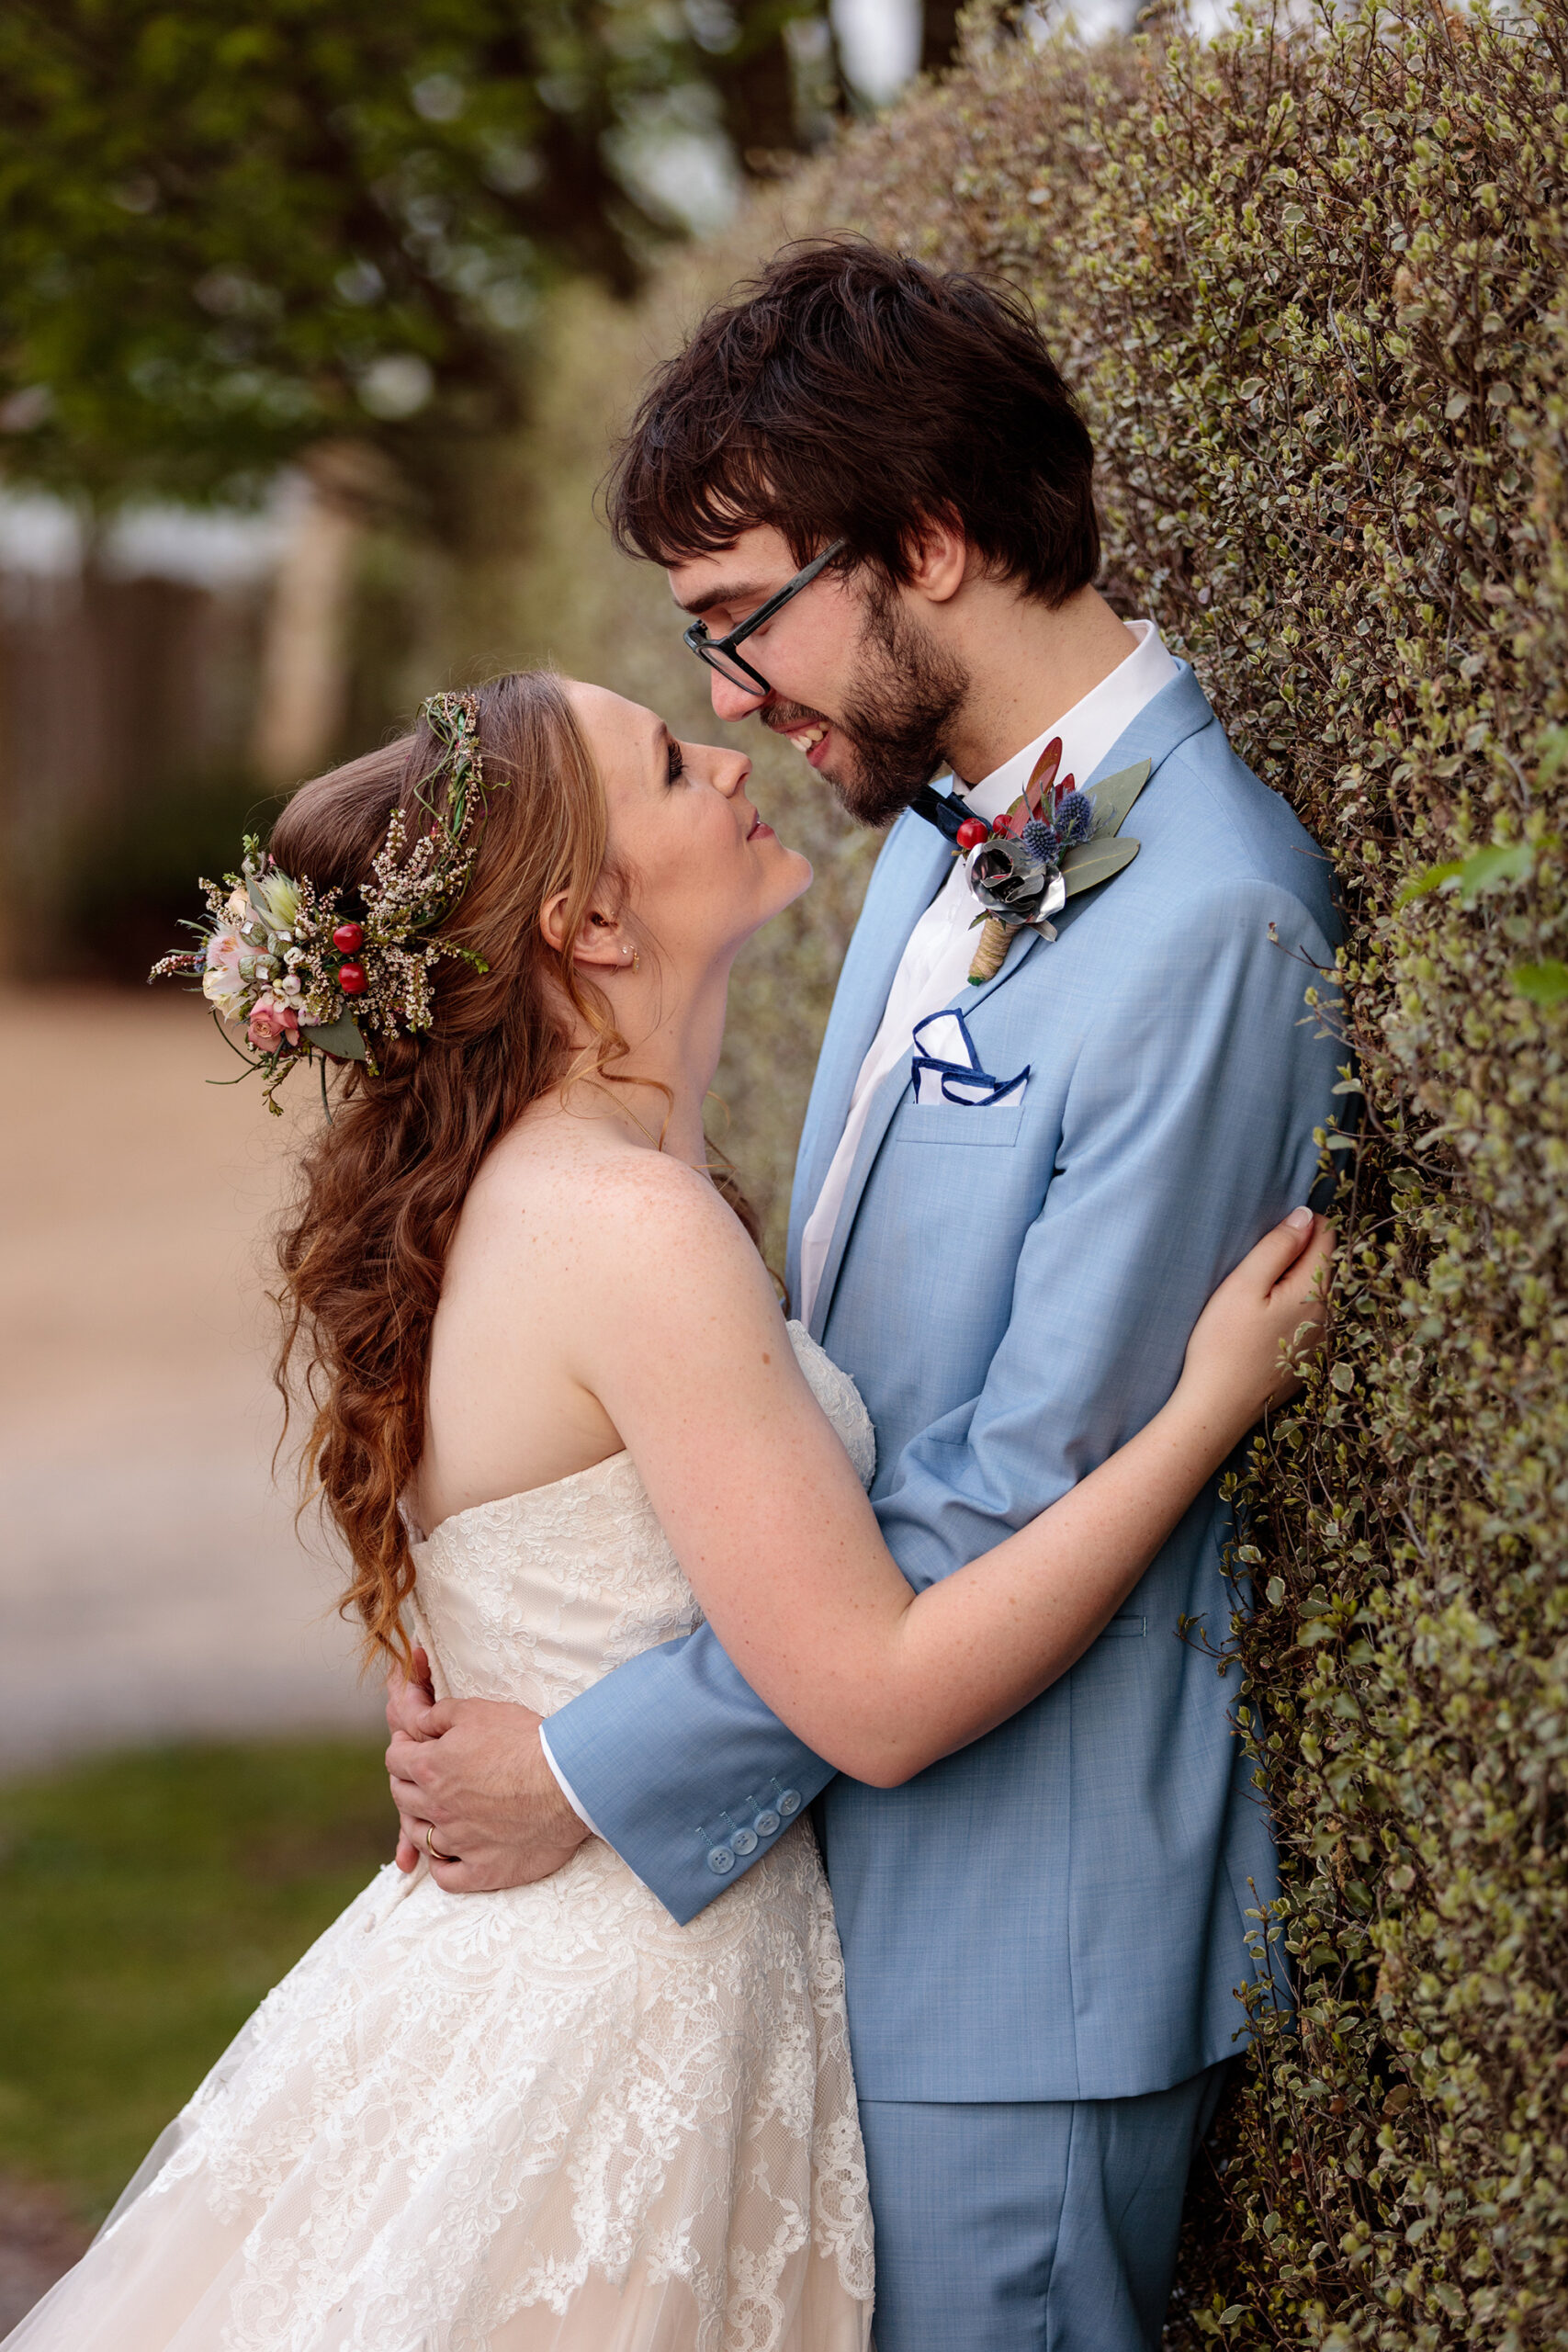 Stacey_Andrew_Rustic-Farm-Wedding_Alan-Rogers-Photography_040